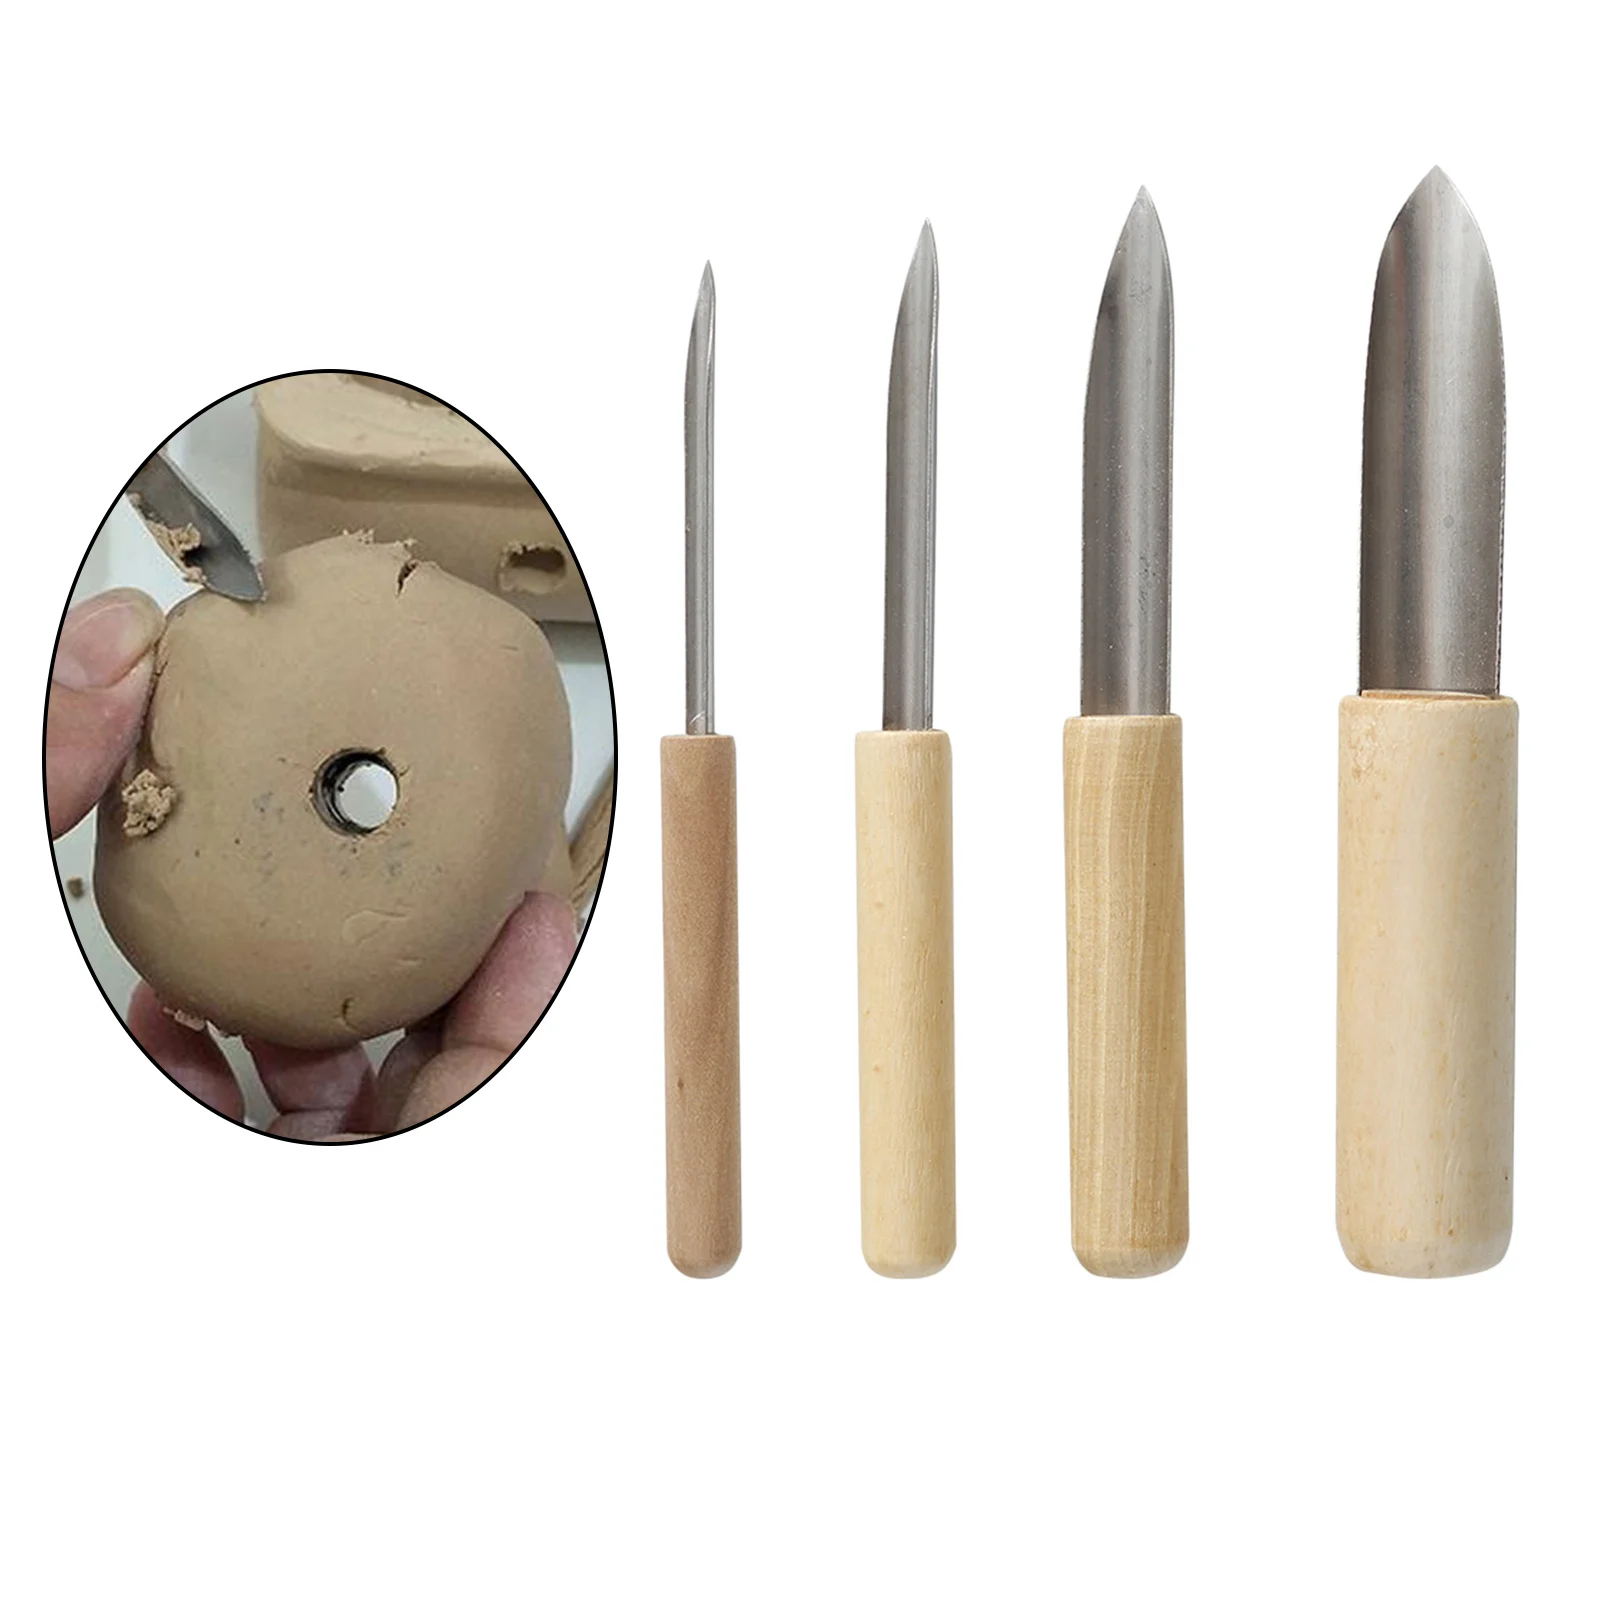 4x Pro Clay Hole Cutters Punch Pottery Sculpture Wooden Punching Polymer Modeling Cutting Scraping Marking Drilling Artist Tool